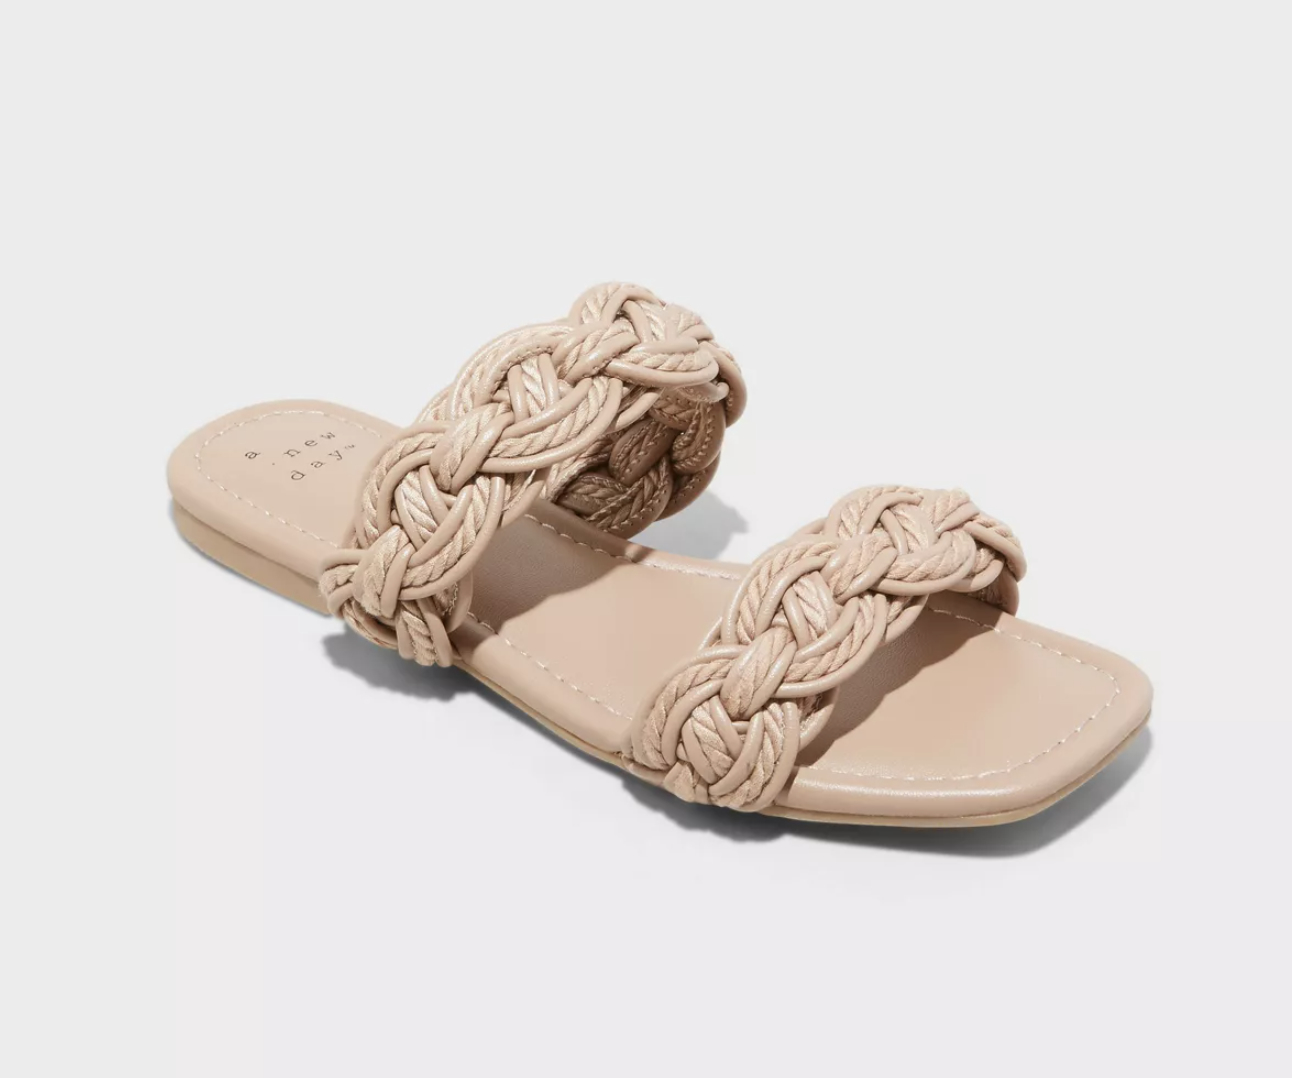 A pair of braided sandals on a plain background